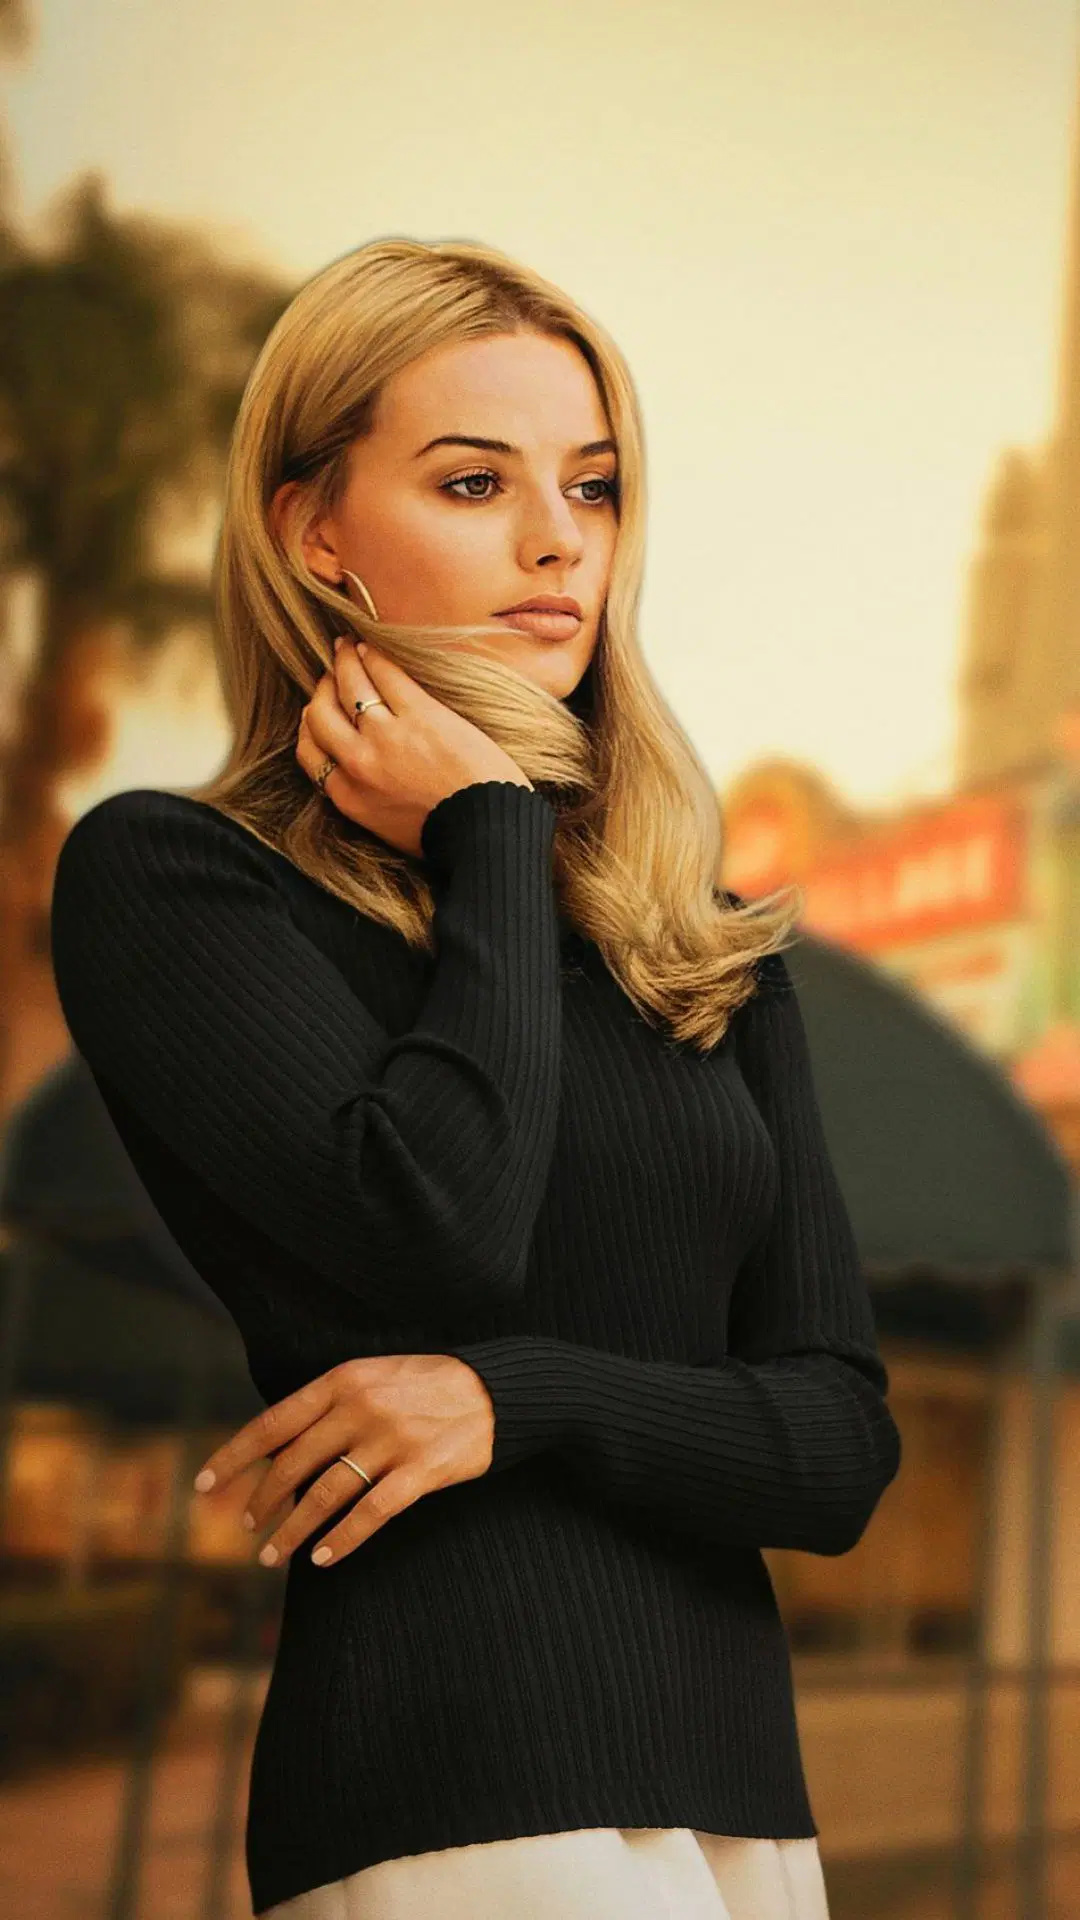 Margot Robbie: Once Upon a Time in Hollywood, 2019, Australian actress. 1080x1920 Full HD Wallpaper.